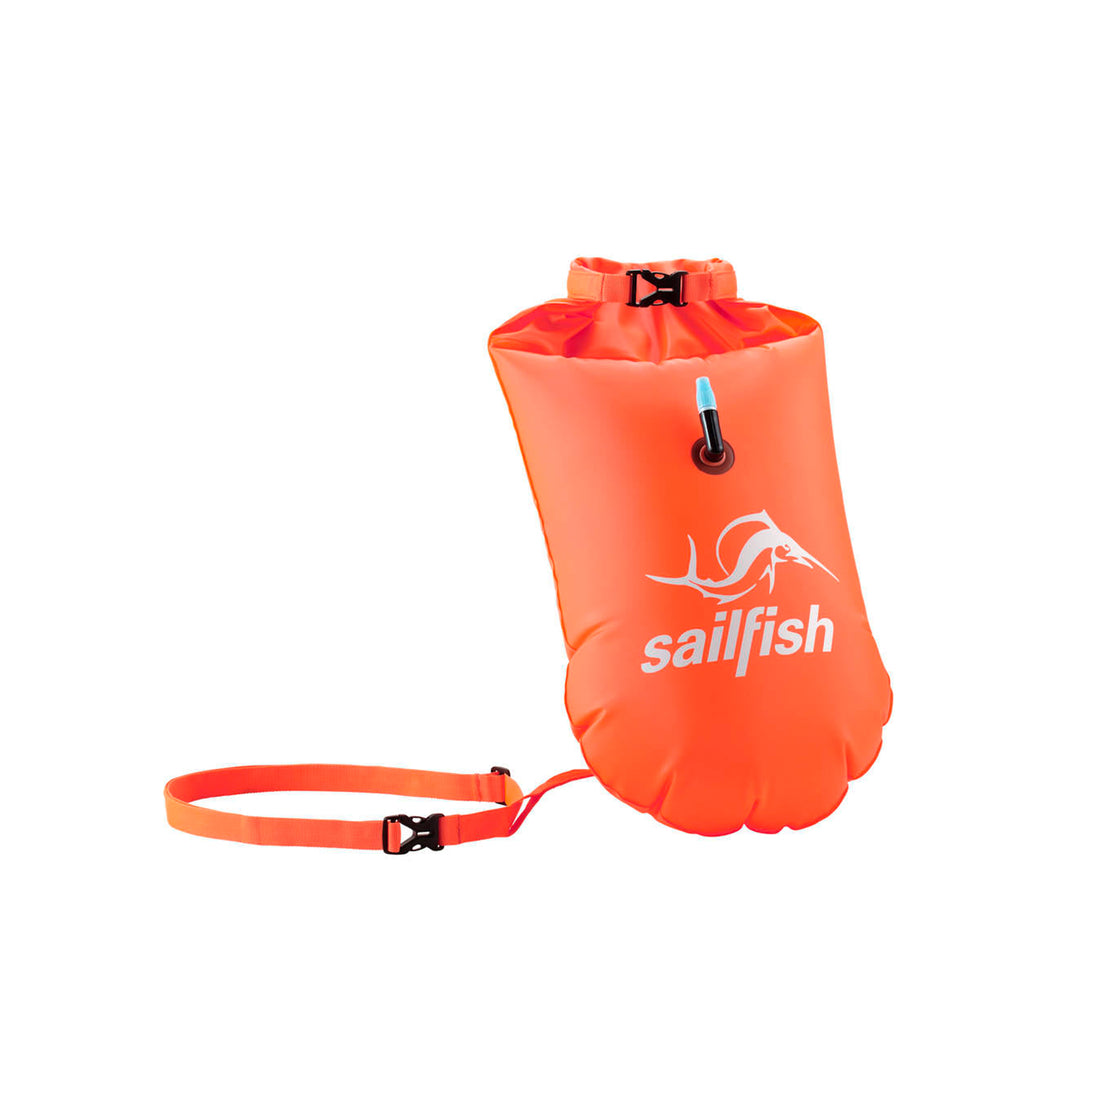 Outdoor Swimming Buoy